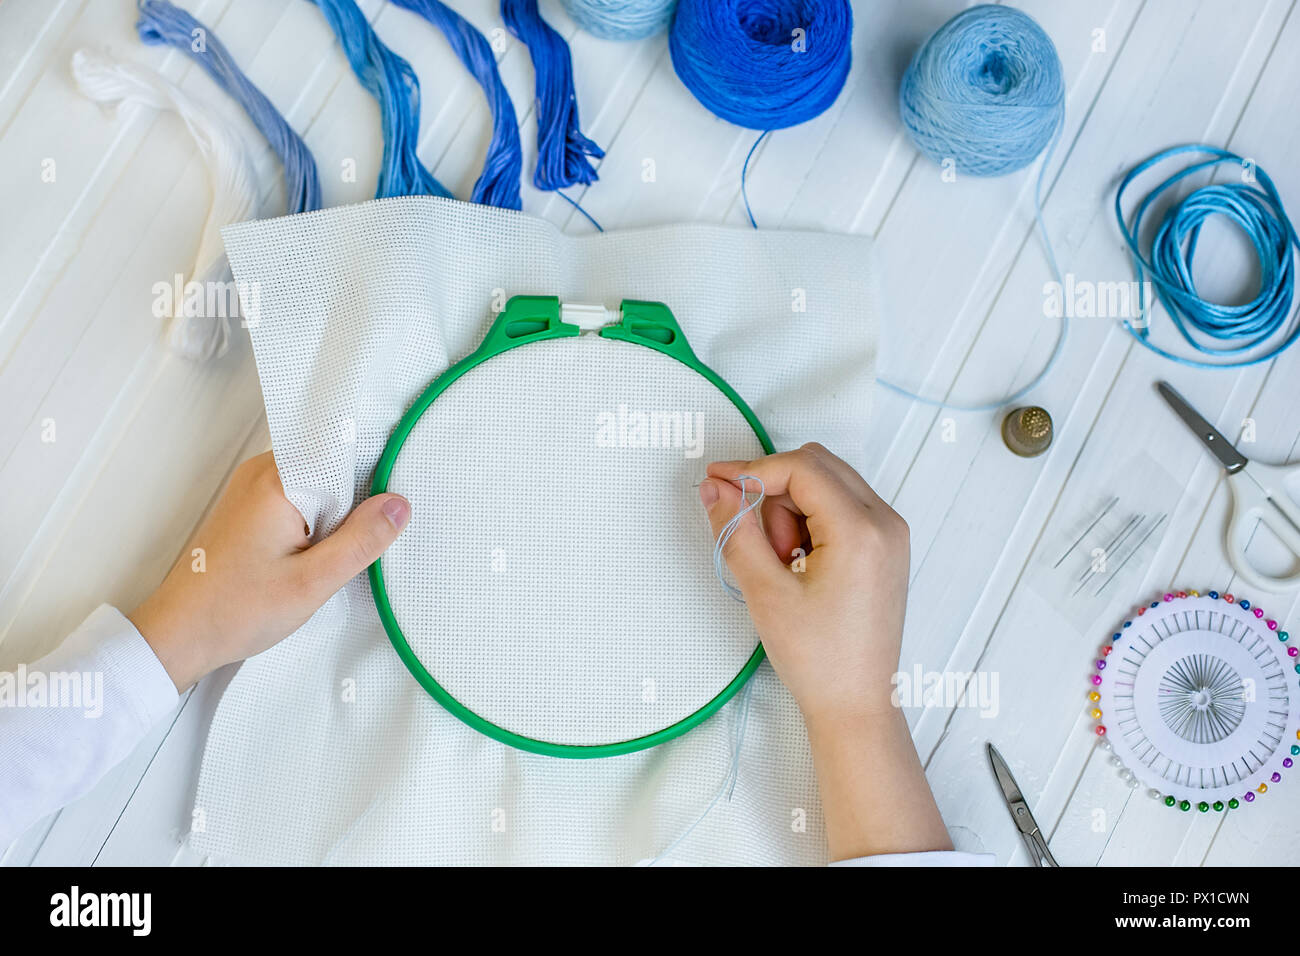 Embroidery hoop with fabric, sewing needles and thread, closeup Stock Photo  - Alamy